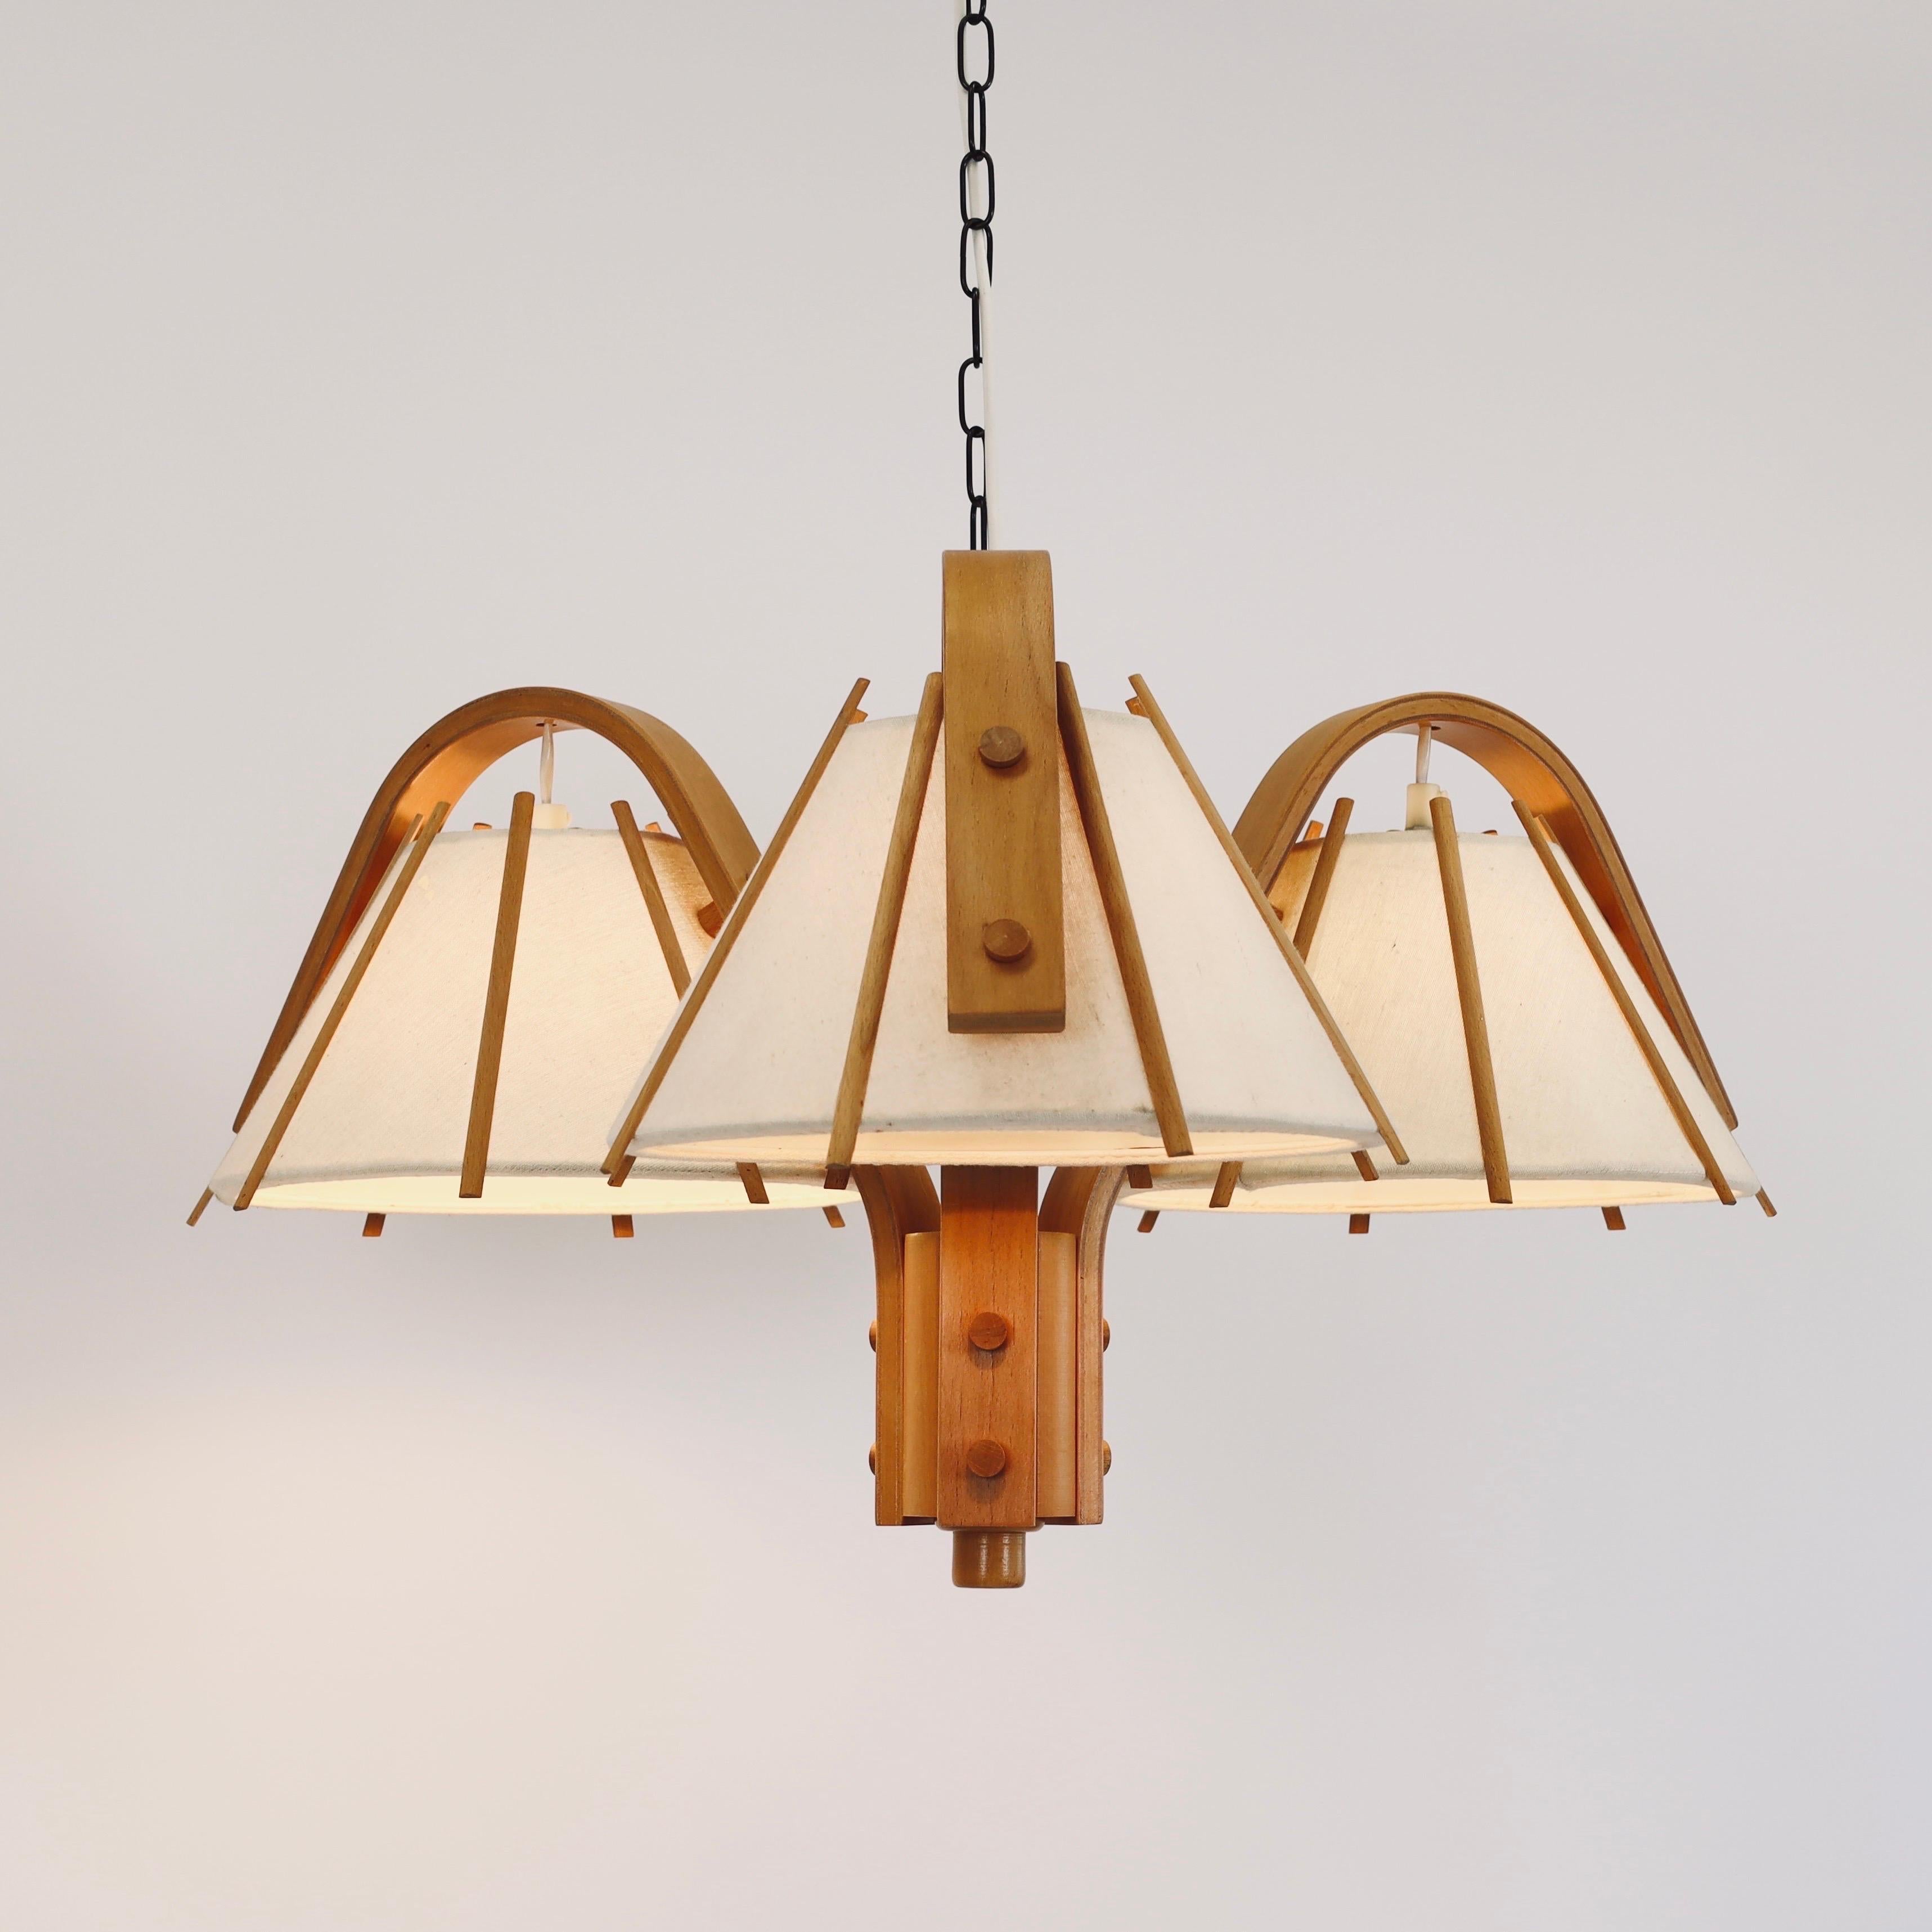 Impressive Scandinavian Modern pendant light in bend Beech wood with three canvas shades. A center piece for a beautiful home designed by Jan Wickelgren in the 1970s for Aneta Sweden. 

* A pendant light bend beech veneer with three cream-coloured